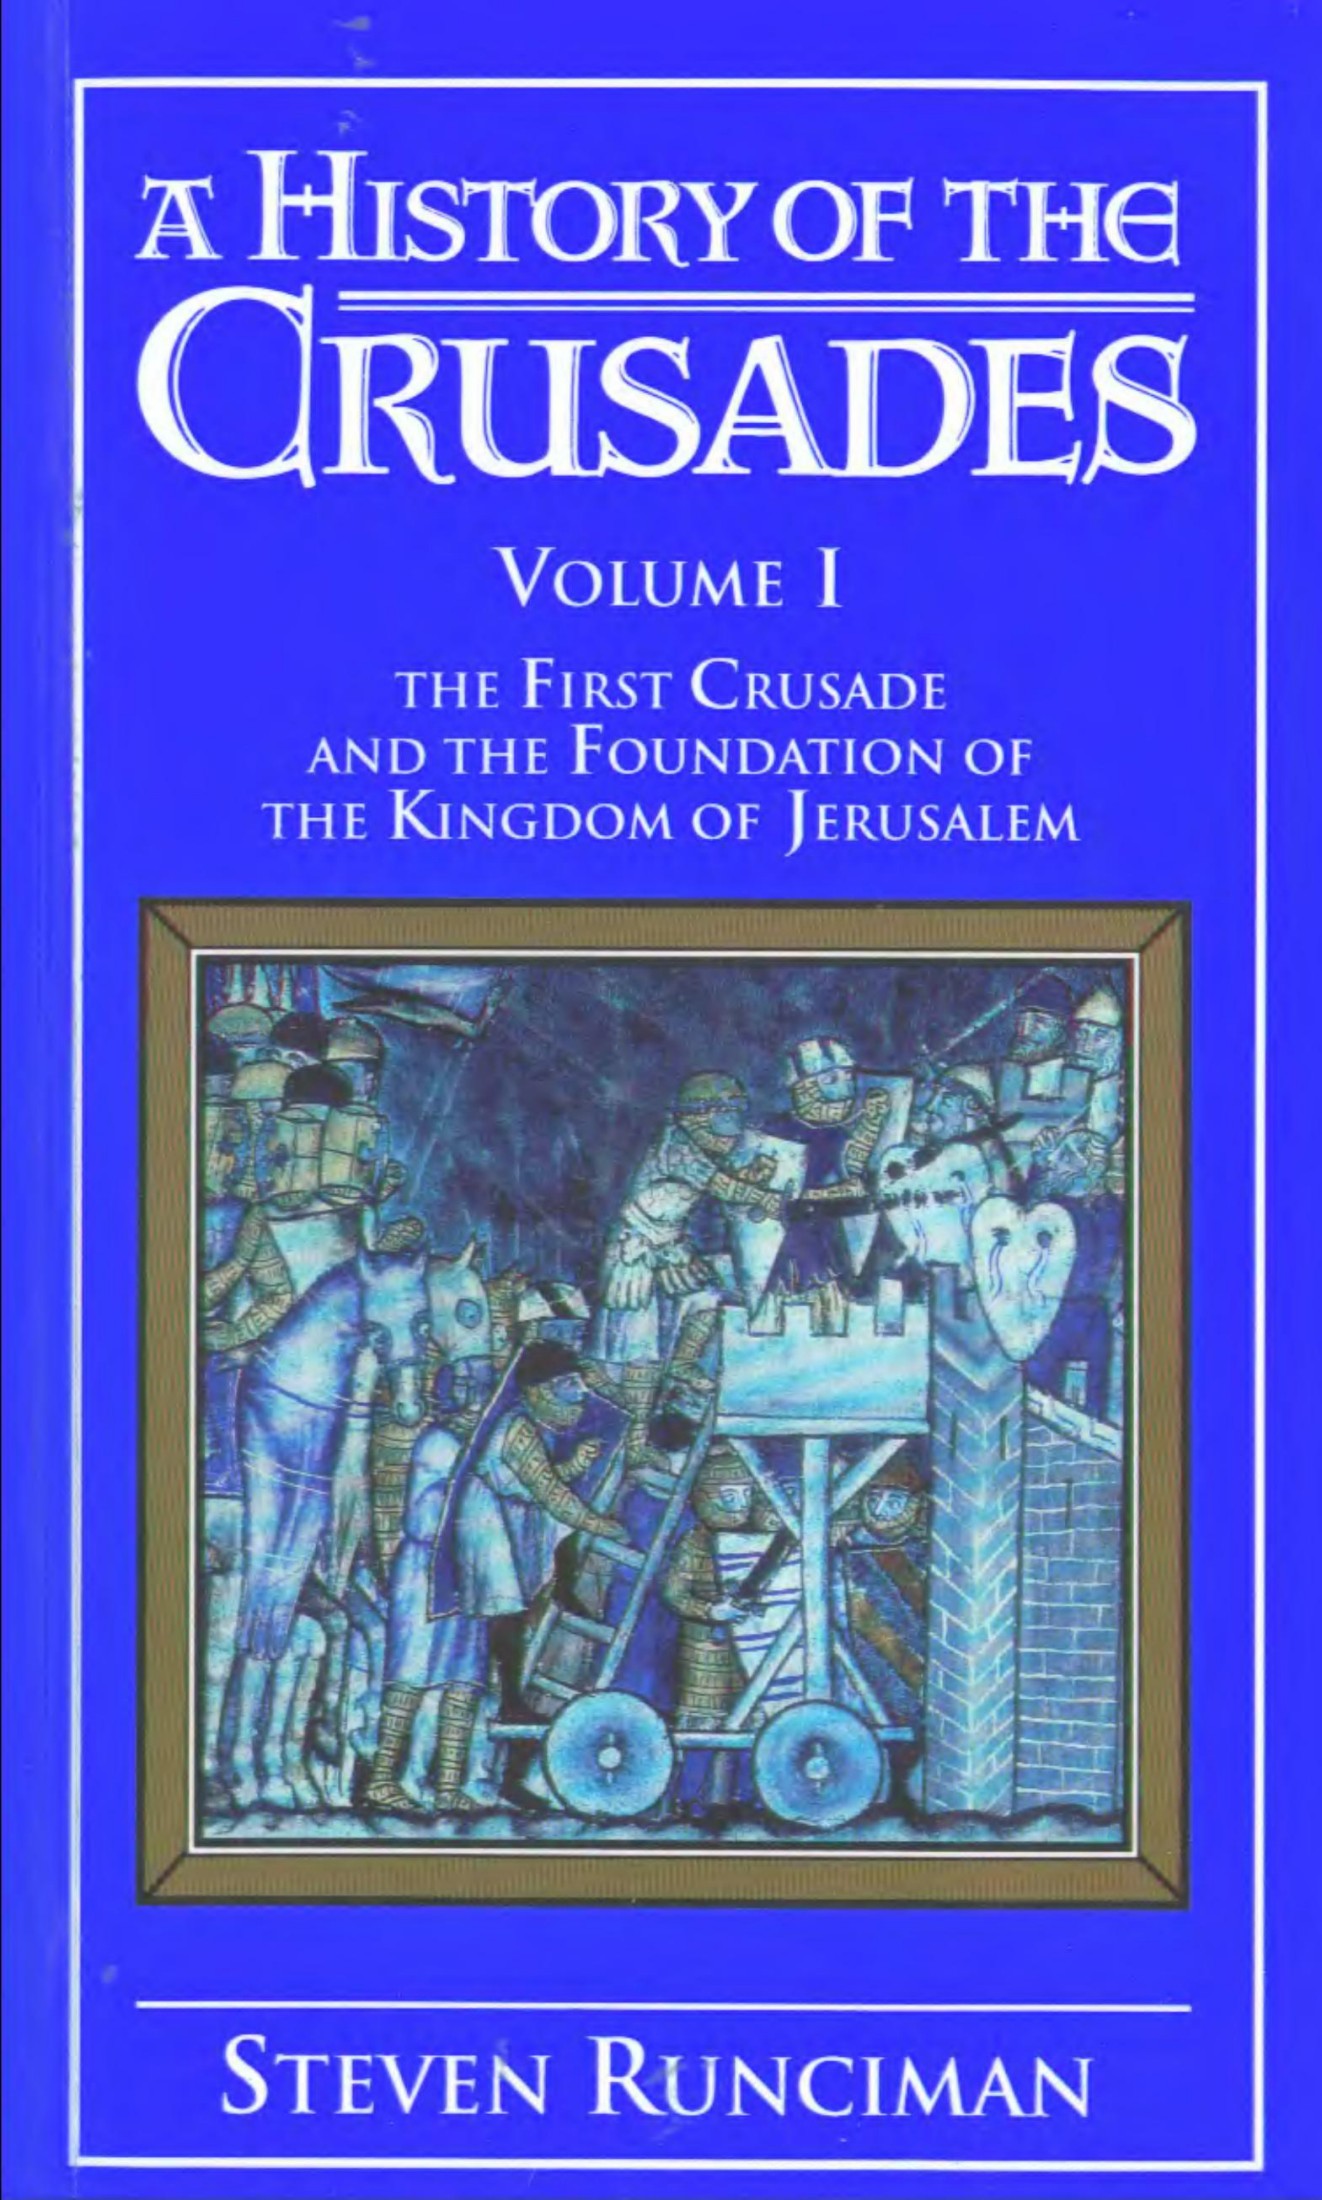 A History of the Crusades: Volume 1, the First Crusade and the Foundation of the Kingdom of Jerusalem